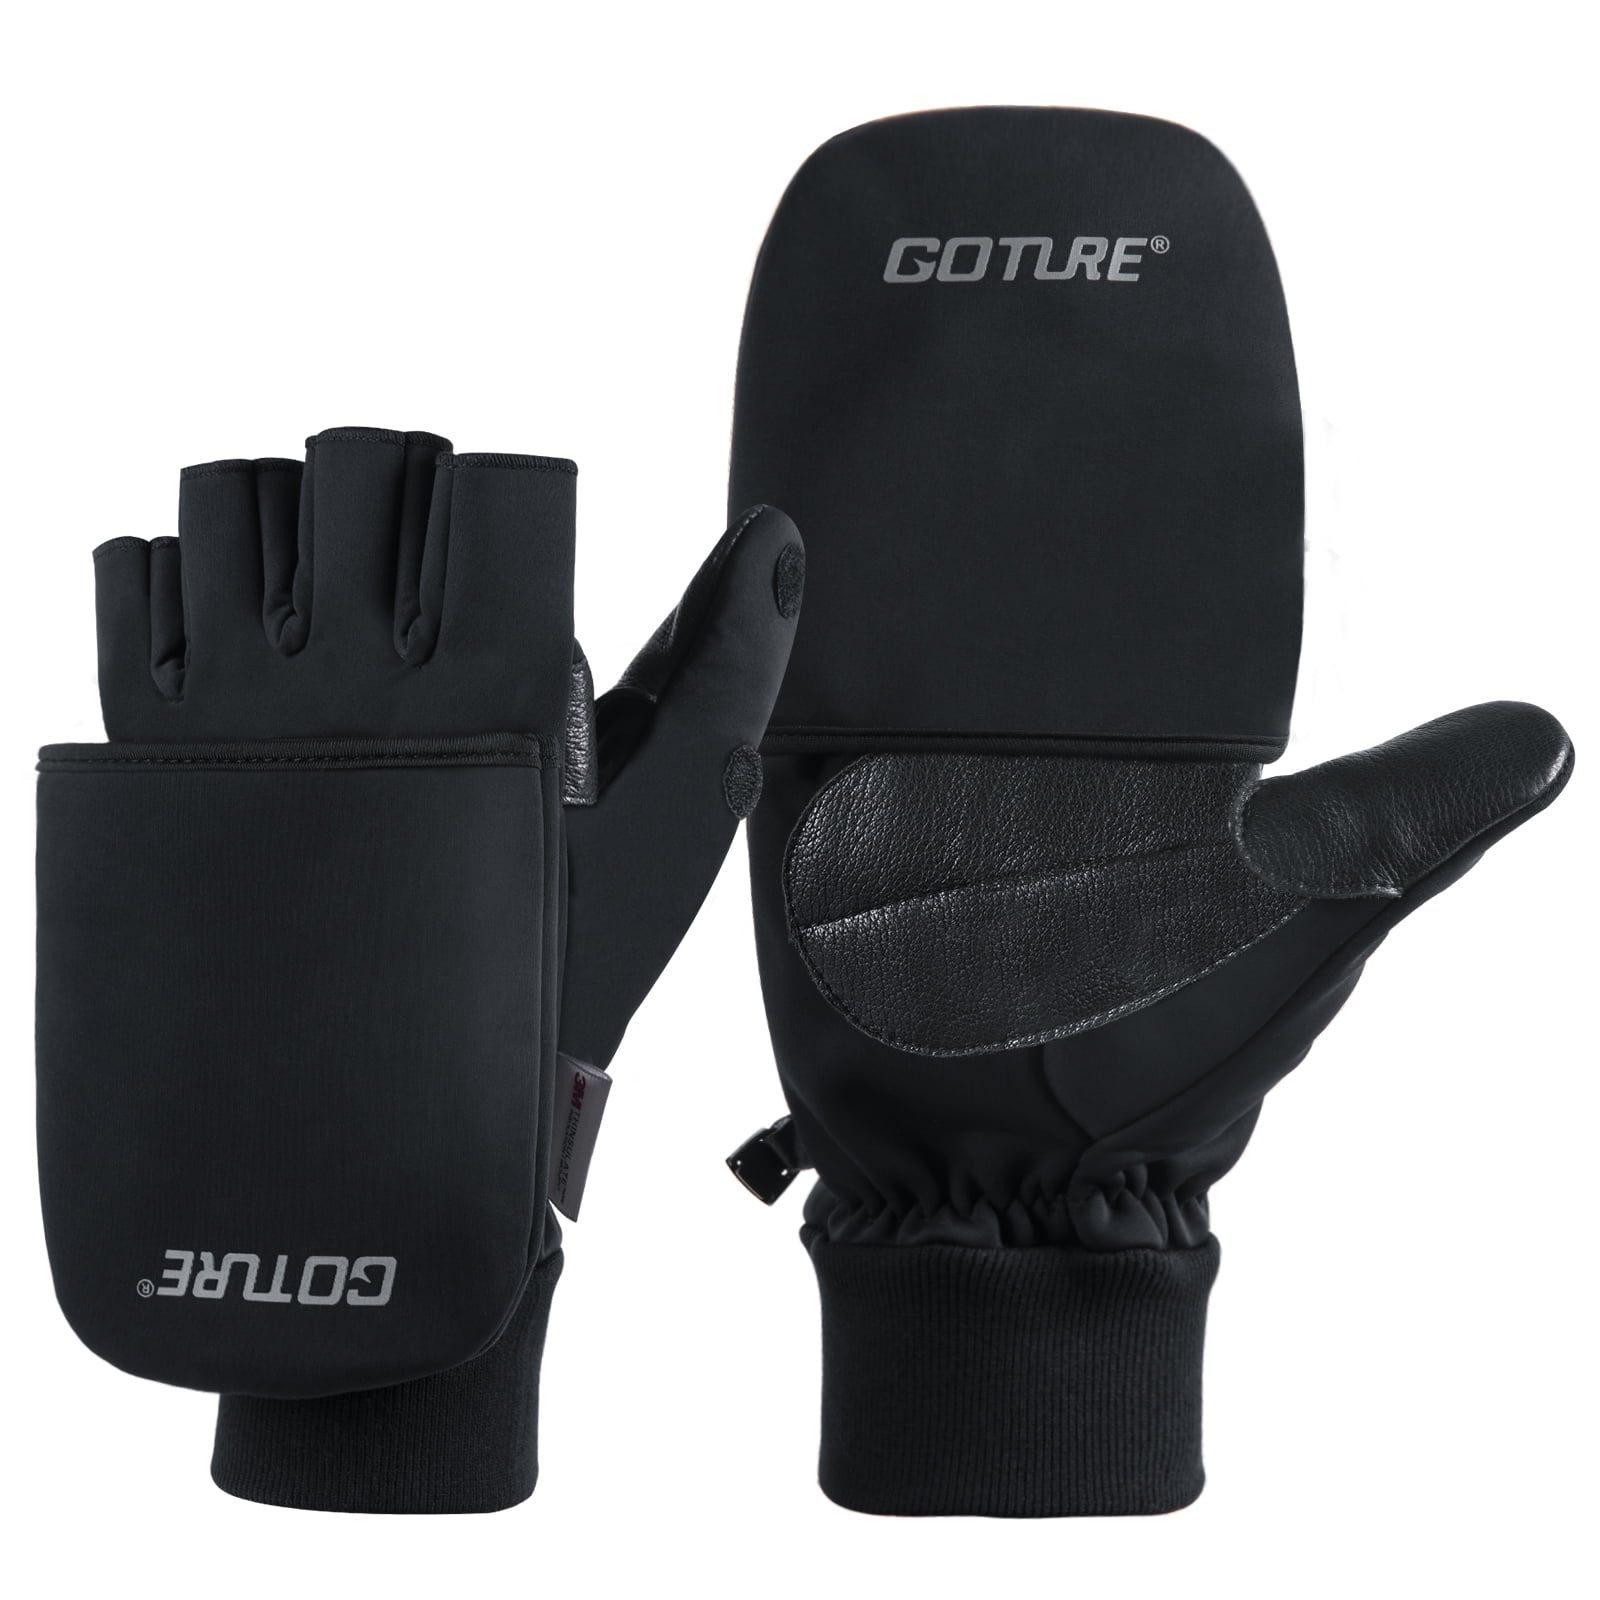 Goture Fishing Gloves Convertible Mittens, Insulated India